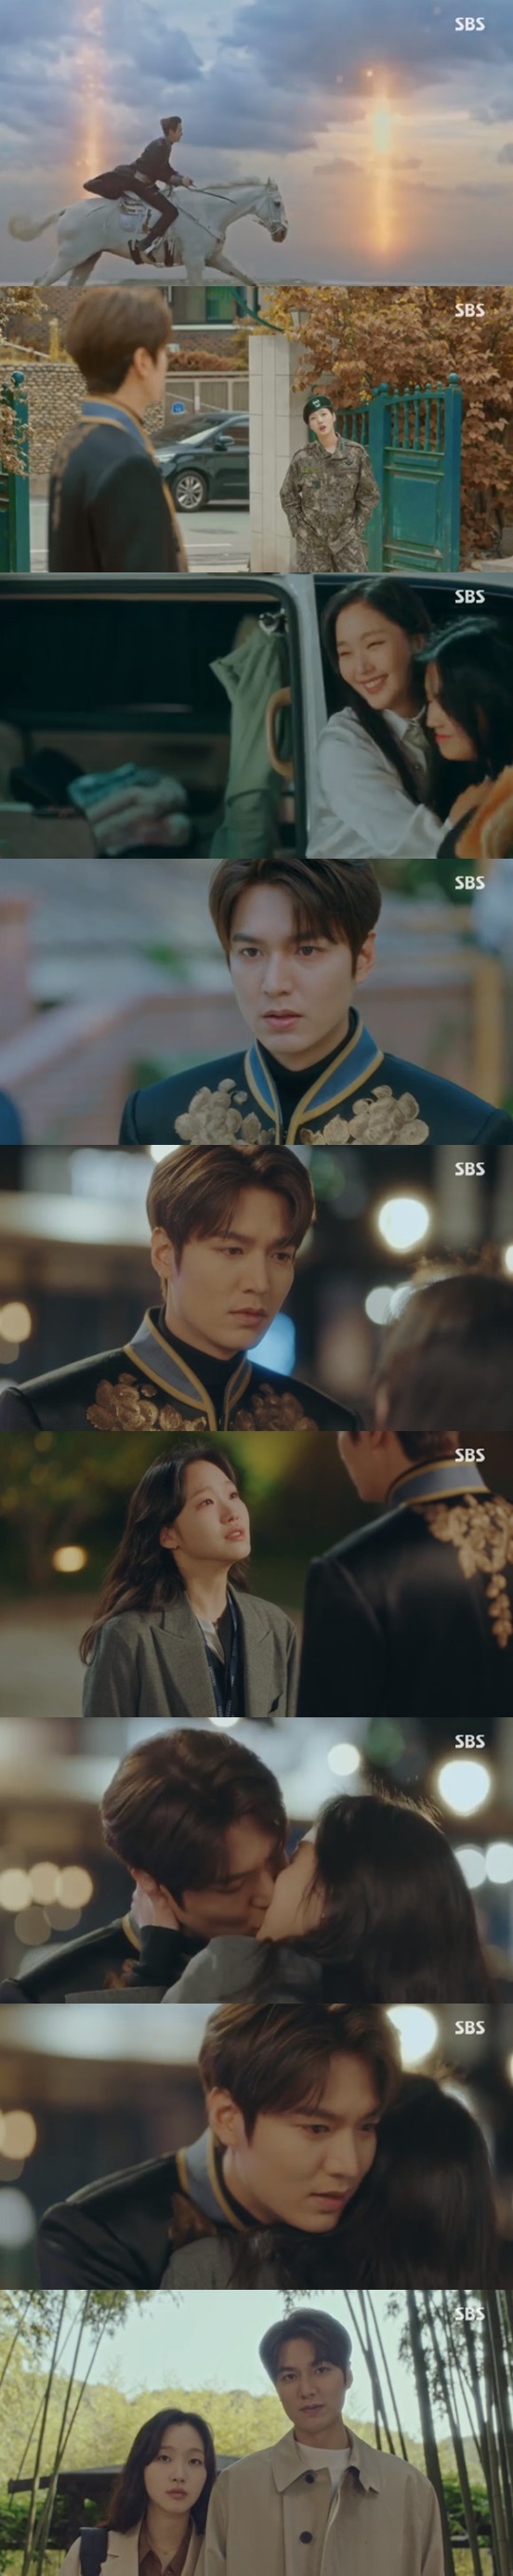 Seoul = = The King: Lord of Eternity Lee Min-ho and Kim Go-eun kept Memory intact and The Slap.In the final episode of SBSs Golden Globe Drama The King: The Lord of Eternity (playplayplay by Kim Eun-sook/directed by Baek Sang-hoon and Jung Ji-hyun), which was broadcast at 10 p.m. on the 12th, Lee Min-ho and Jung Tae-eul (played by Kim Go-eun) were portrayed.Lee Lim (Lee Jung-jin) died, and the cracked World was back in place, but Igon and Jung-tae could not meet.The world of Jung Tae-eul flowed differently, and Lee Gon was jumping over time and space in search of Jung Tae-eul.In the World where Igon opened, there were other people who had the face of Jung Tae-eul, and Igon did not give up.After all, facing the Korean situation in 2021, Igon said, You are still in space. You still dont know me. Why are you crying?I once again confirmed that I had found the state that kept all the memories.Jung Tae-eun looked at Lee and said, Why did you come so late? I waited so long every day, but I waited every day.So Igon said, I had to cut the reverse, bring Young back, and I had to find my way again, so I was late to open the door of Space that came.I thought I could not remember even if I found it. Jeong Tae-eun asked Igon, Did you find me yet? And Igon said, I wanted to see you who forgot me.I am the emperor of the Korean Empire, and my name is Igon, who is not to call me. But how do you remember me when two worlds flow differently? I had a lot of things, too, he kissed Igon.Igon confessed to Jung Tae, I love you so much that I have not said this yet. Jung Tae-eun said, This is the completion.I love you too, I love you so much, he replied, and they finally completed the love beyond parallel World.Meanwhile, SBS The King: The Monarch of Eternity will be followed by Convenience Store Morning Star starring Ji Chang-wook and Kim Yoo-jung.